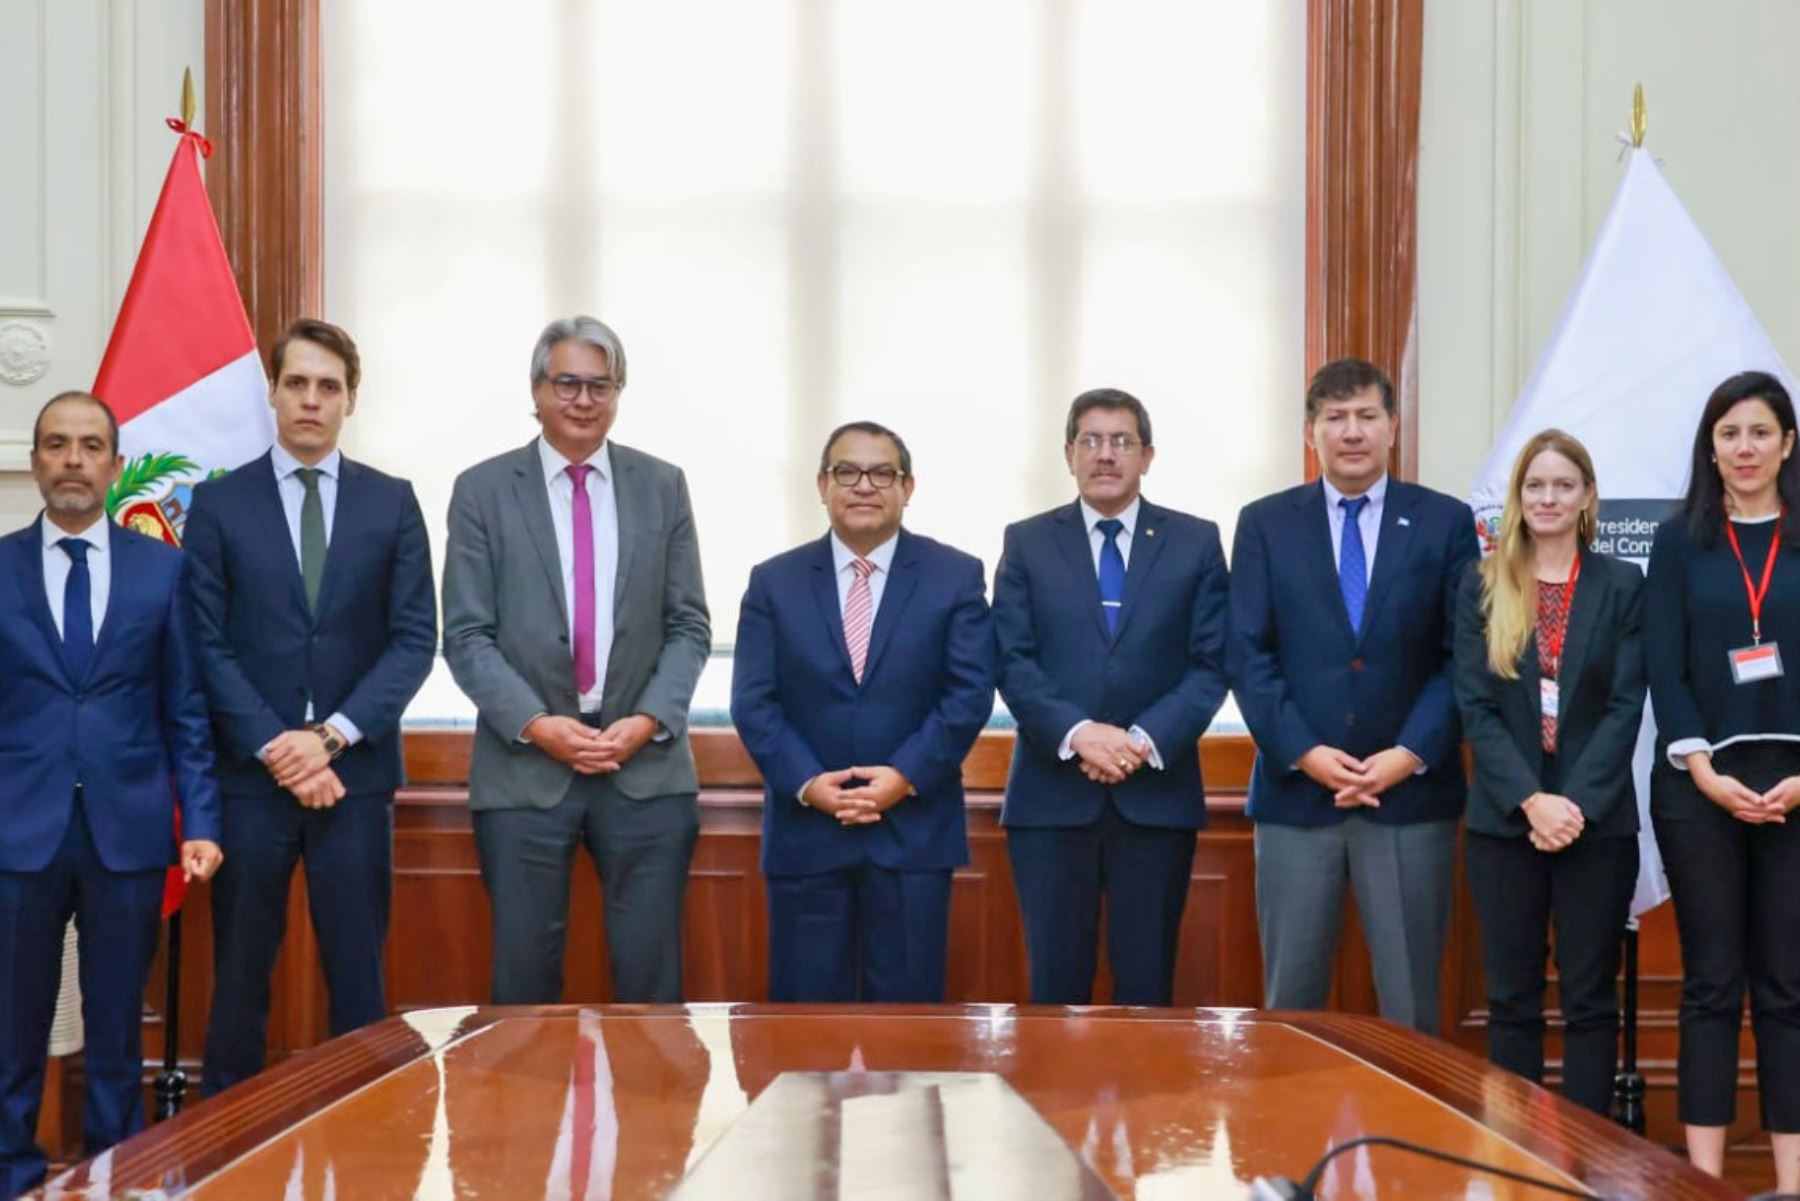 'Peru maintains policy of strict respect for human rights'.– Prime Minister Otarola